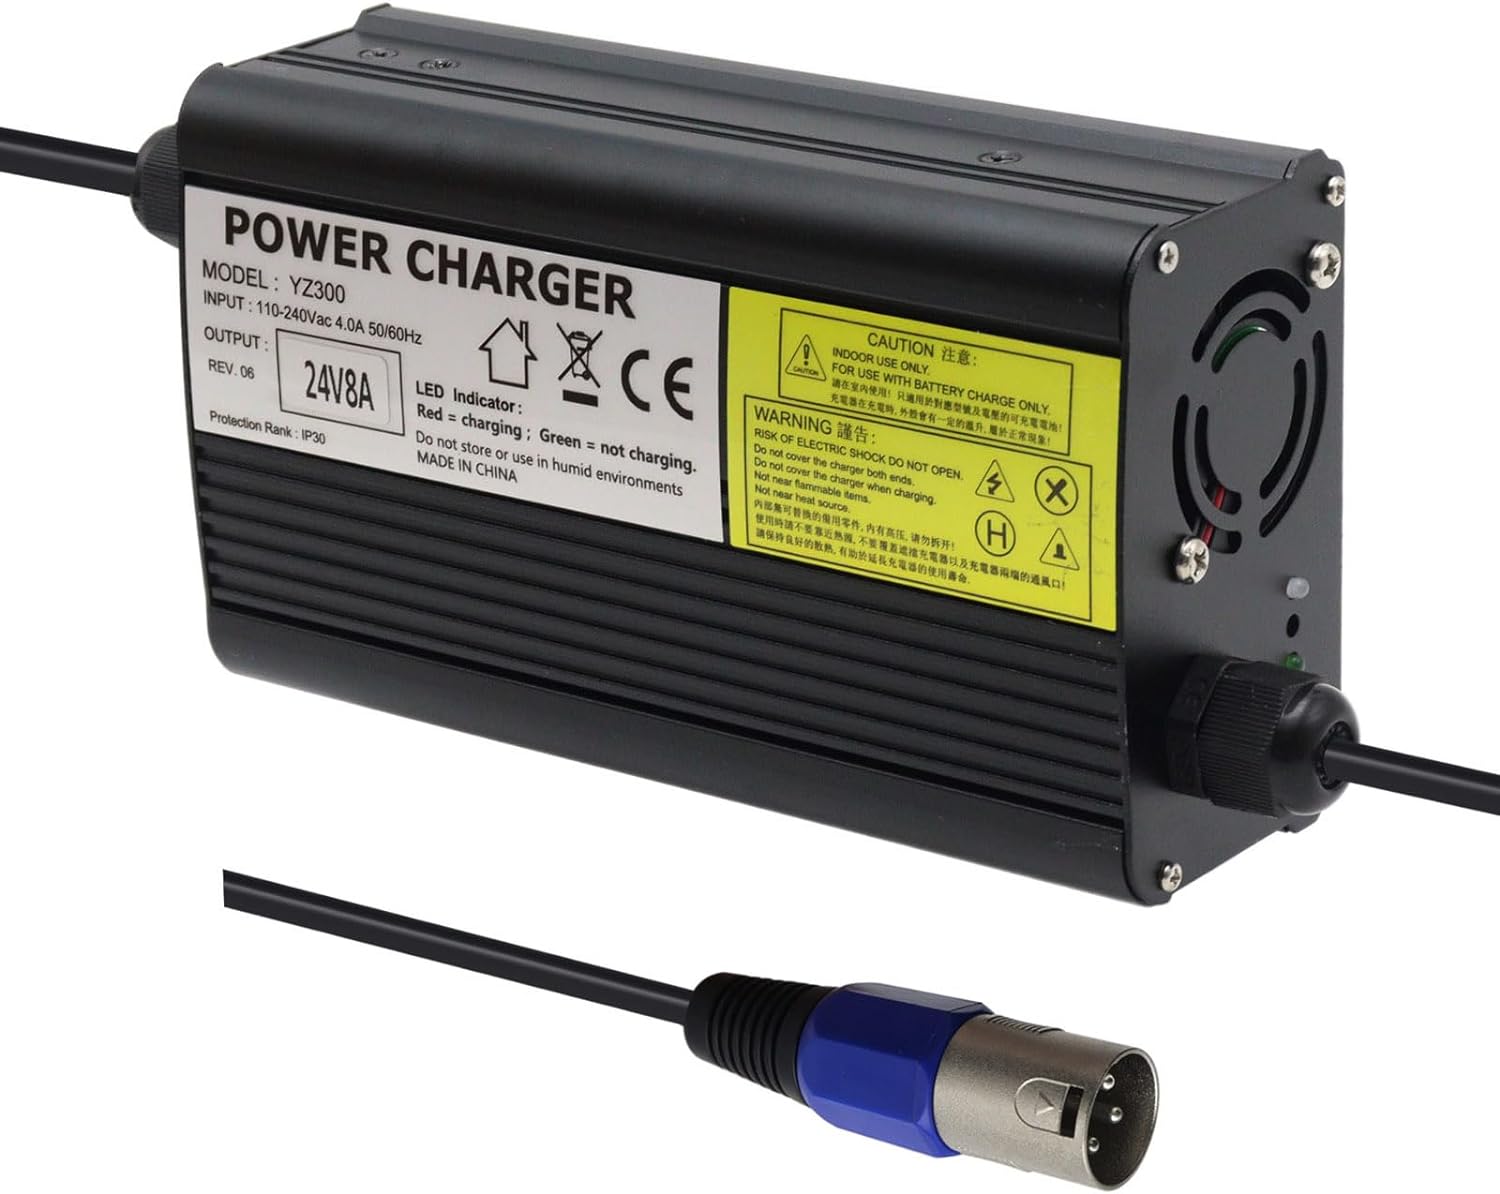 24V 8A Battery Charger with 3-Pin XLR Connector for Sealed AGM, Gel, 24BC8000T-1, Jazzy 1450, Invacare Pronto M51, tdx 3 - Click Image to Close